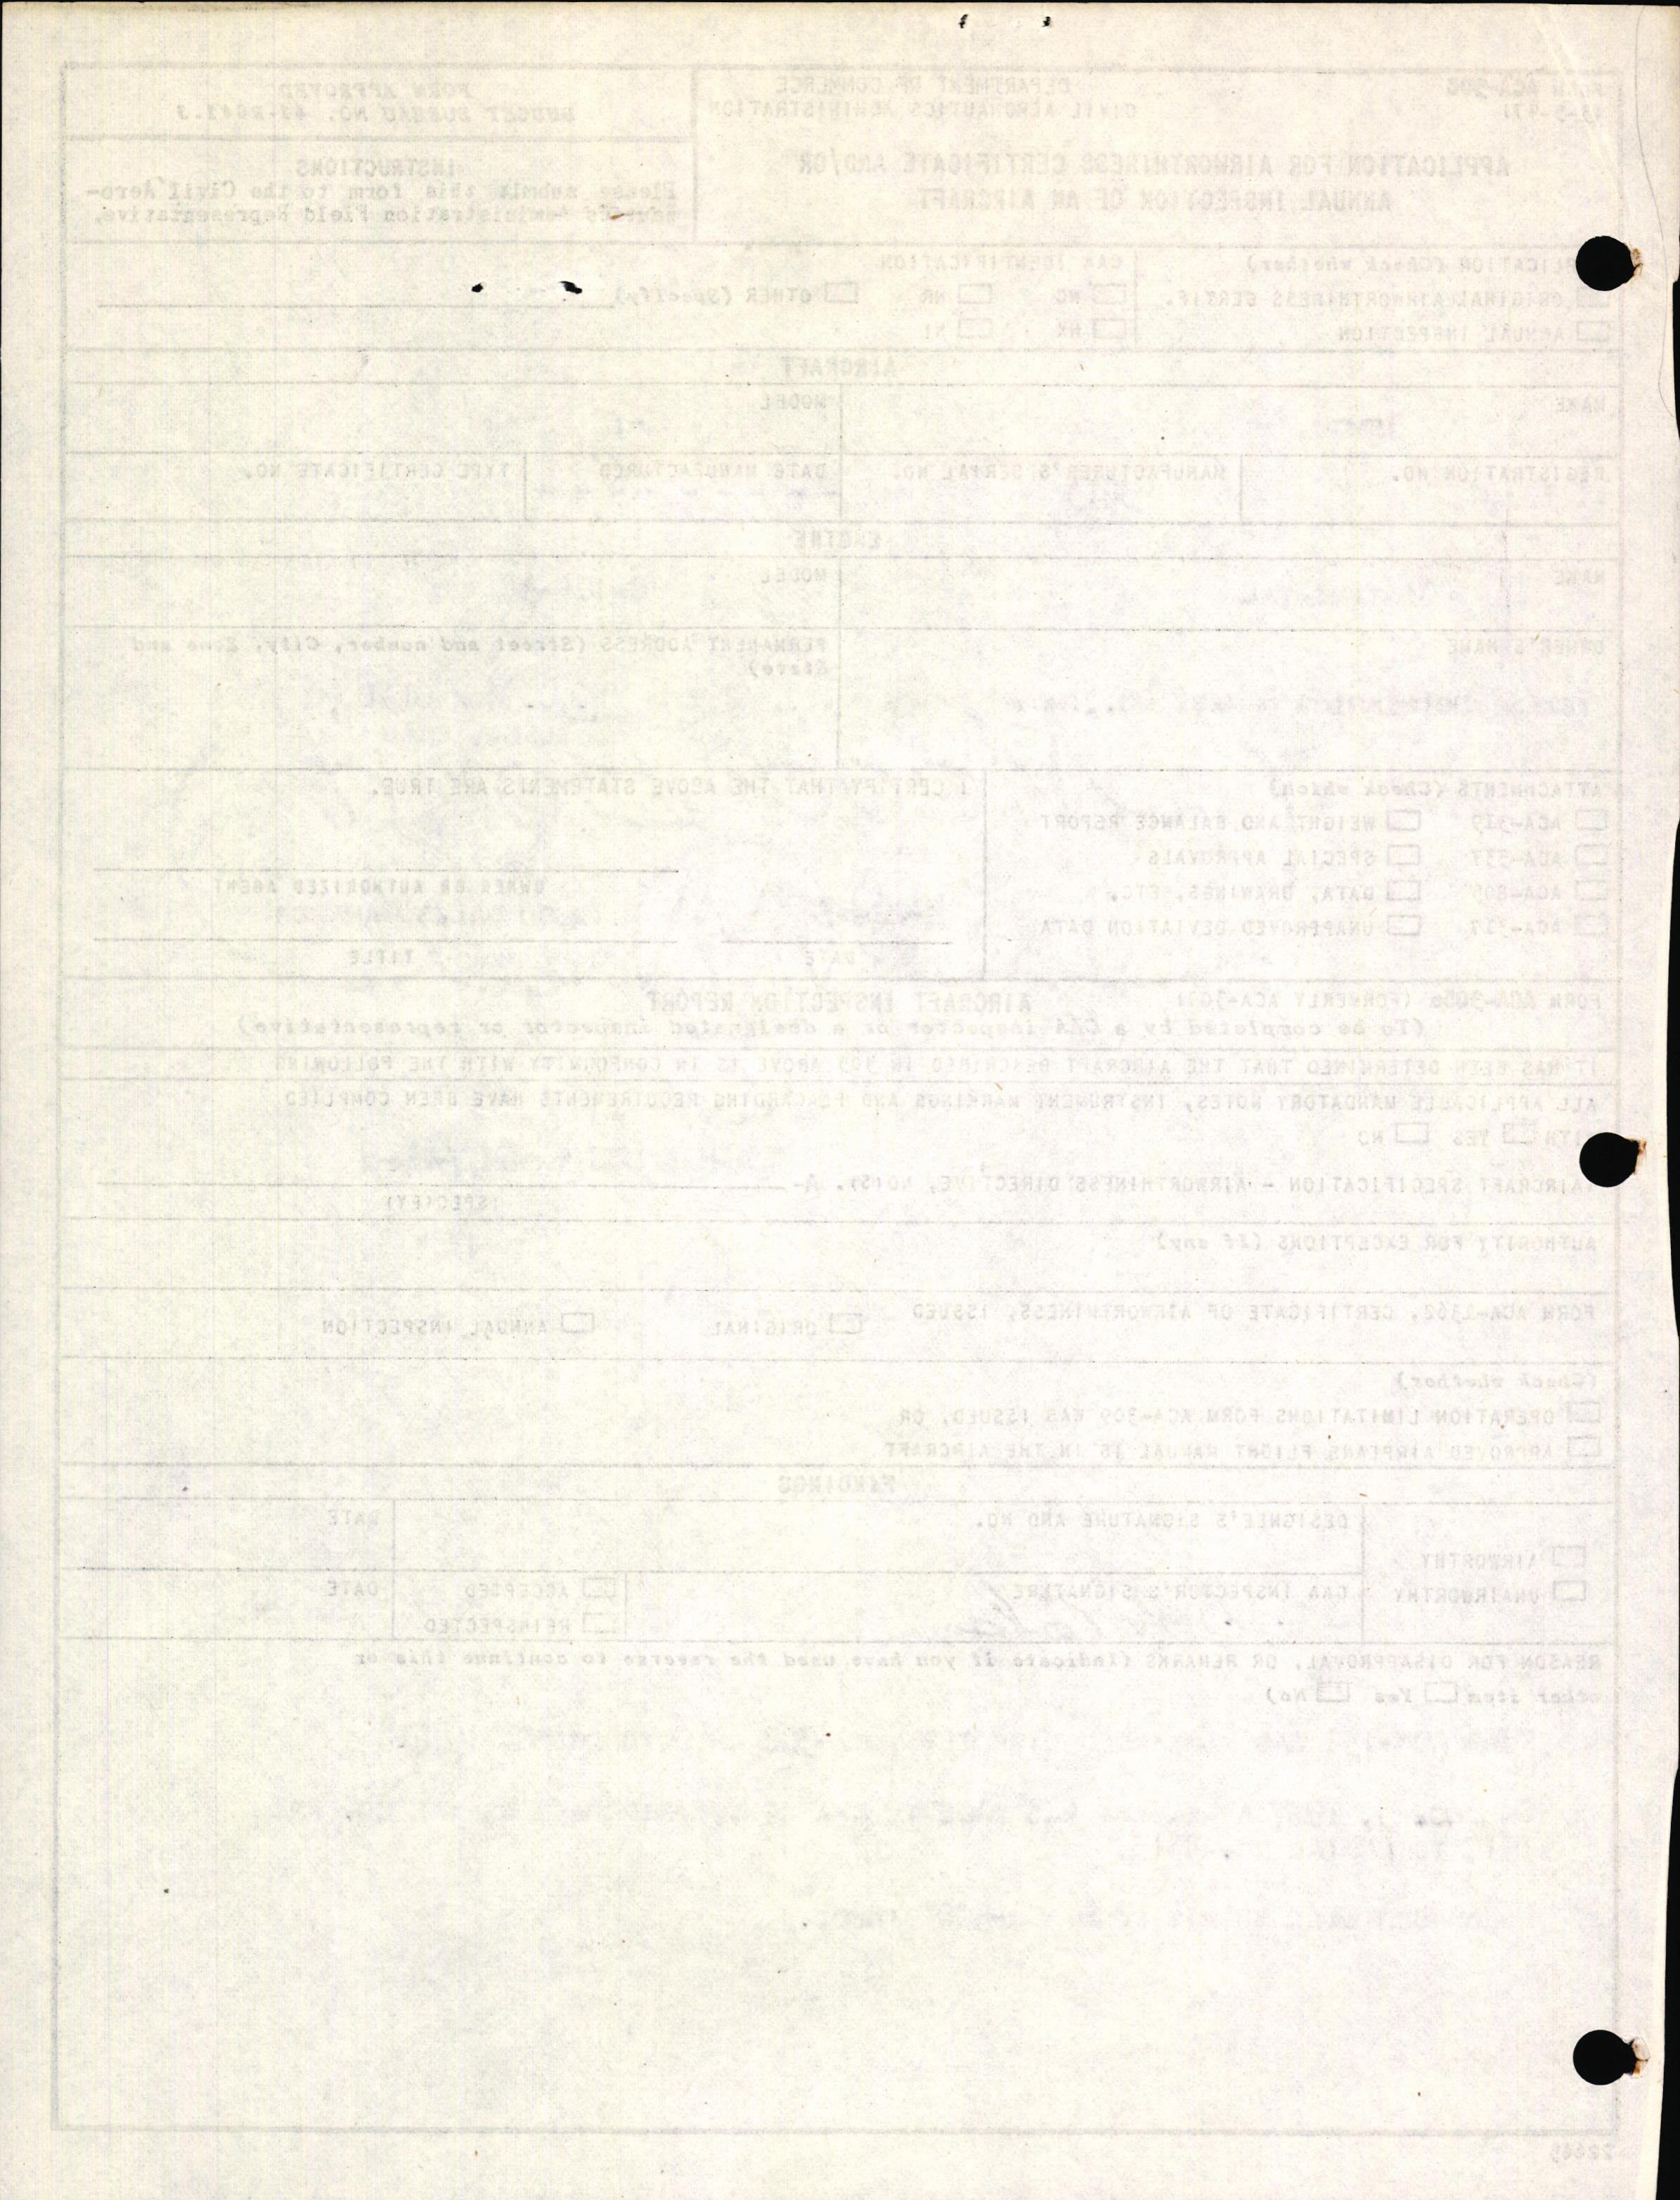 Sample page 2 from AirCorps Library document: Technical Information for Serial Number 3513